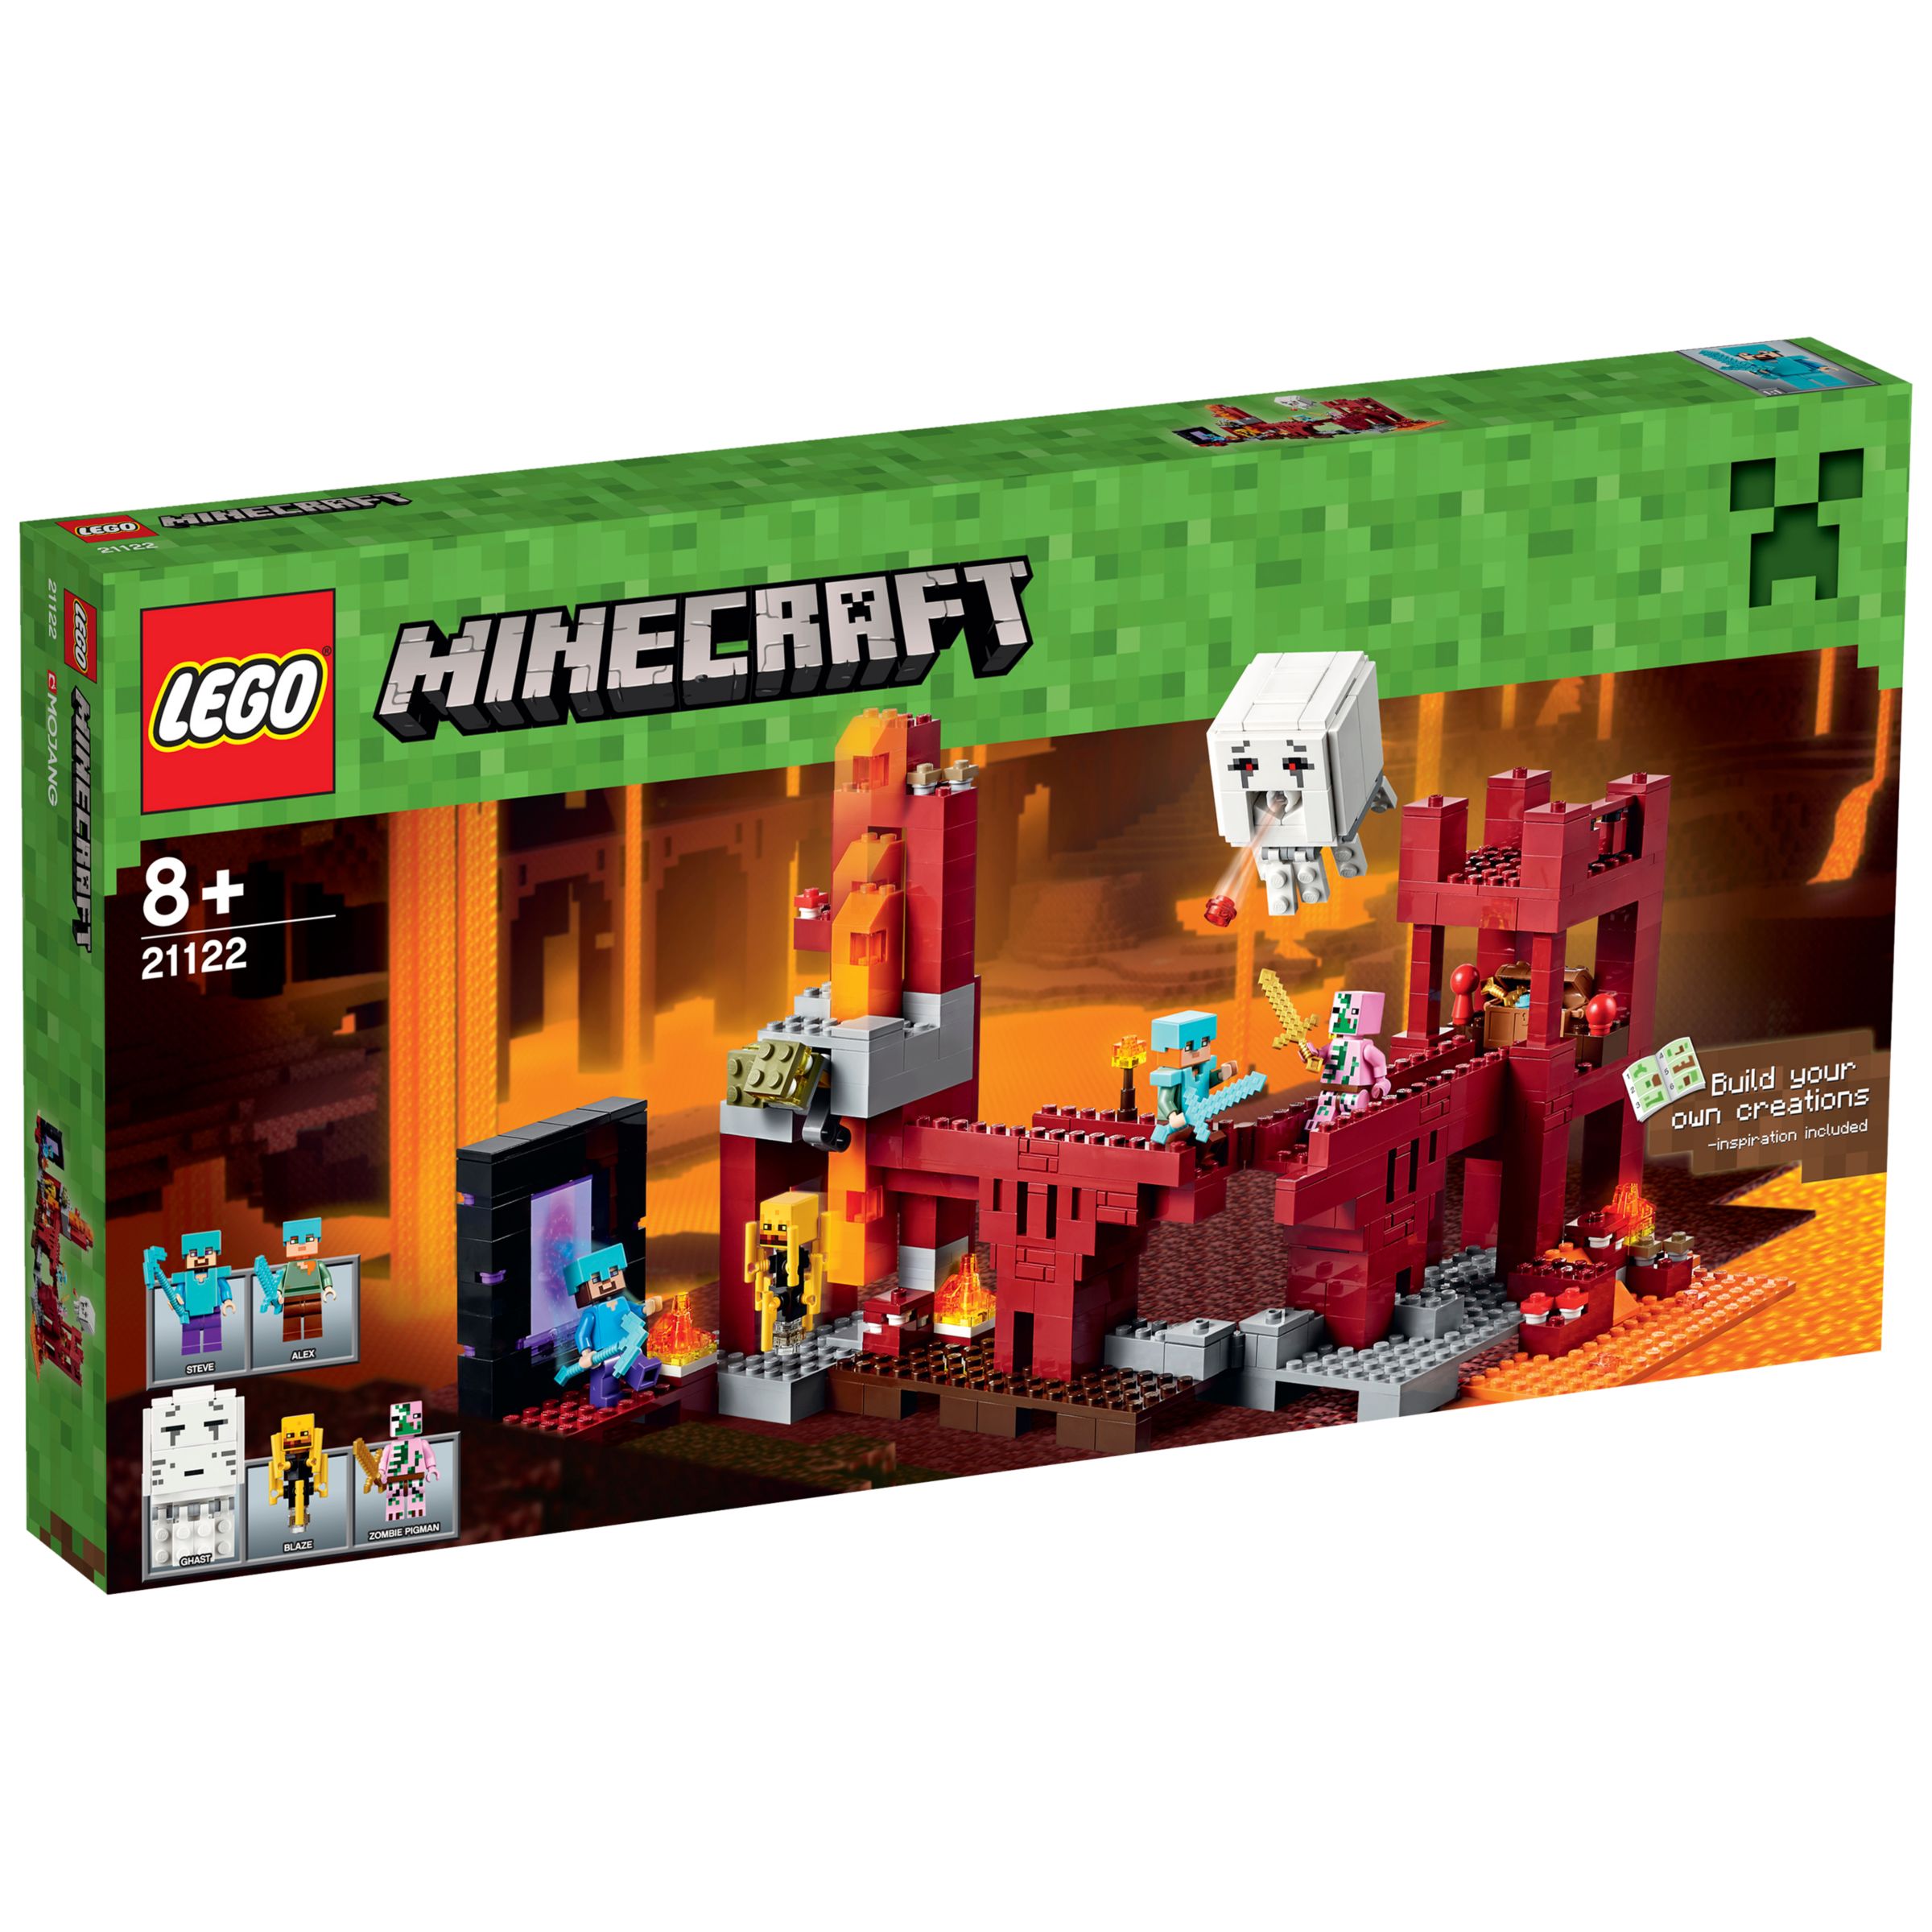 LEGO Minecraft 21122 The Nether Fortress at John Lewis & Partners